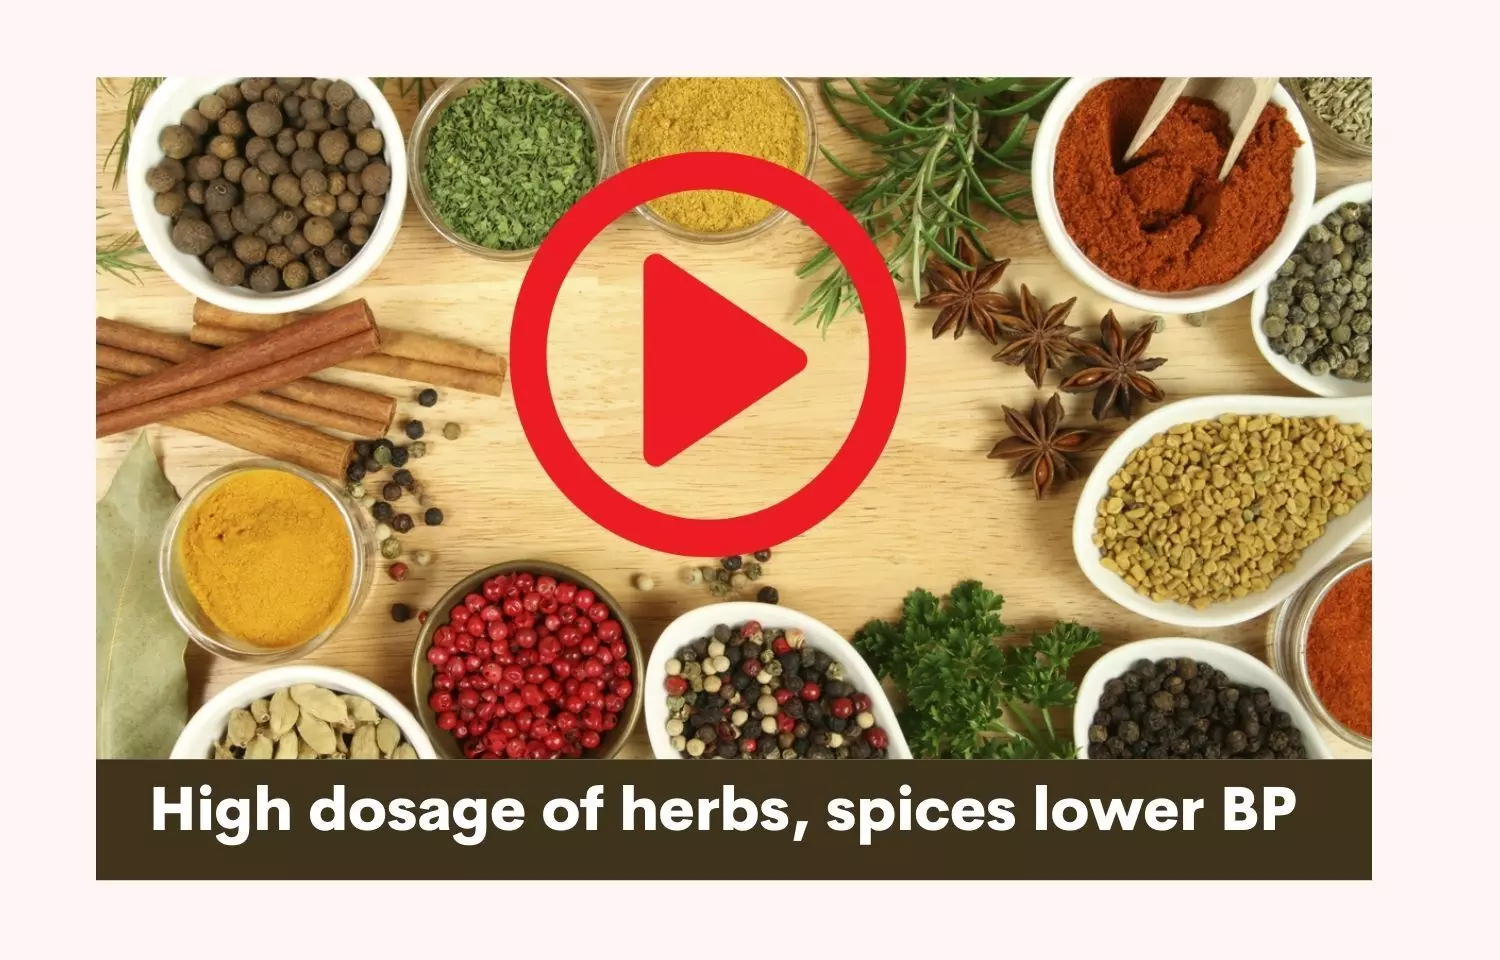 Herbs, spices lower BP in high dosage